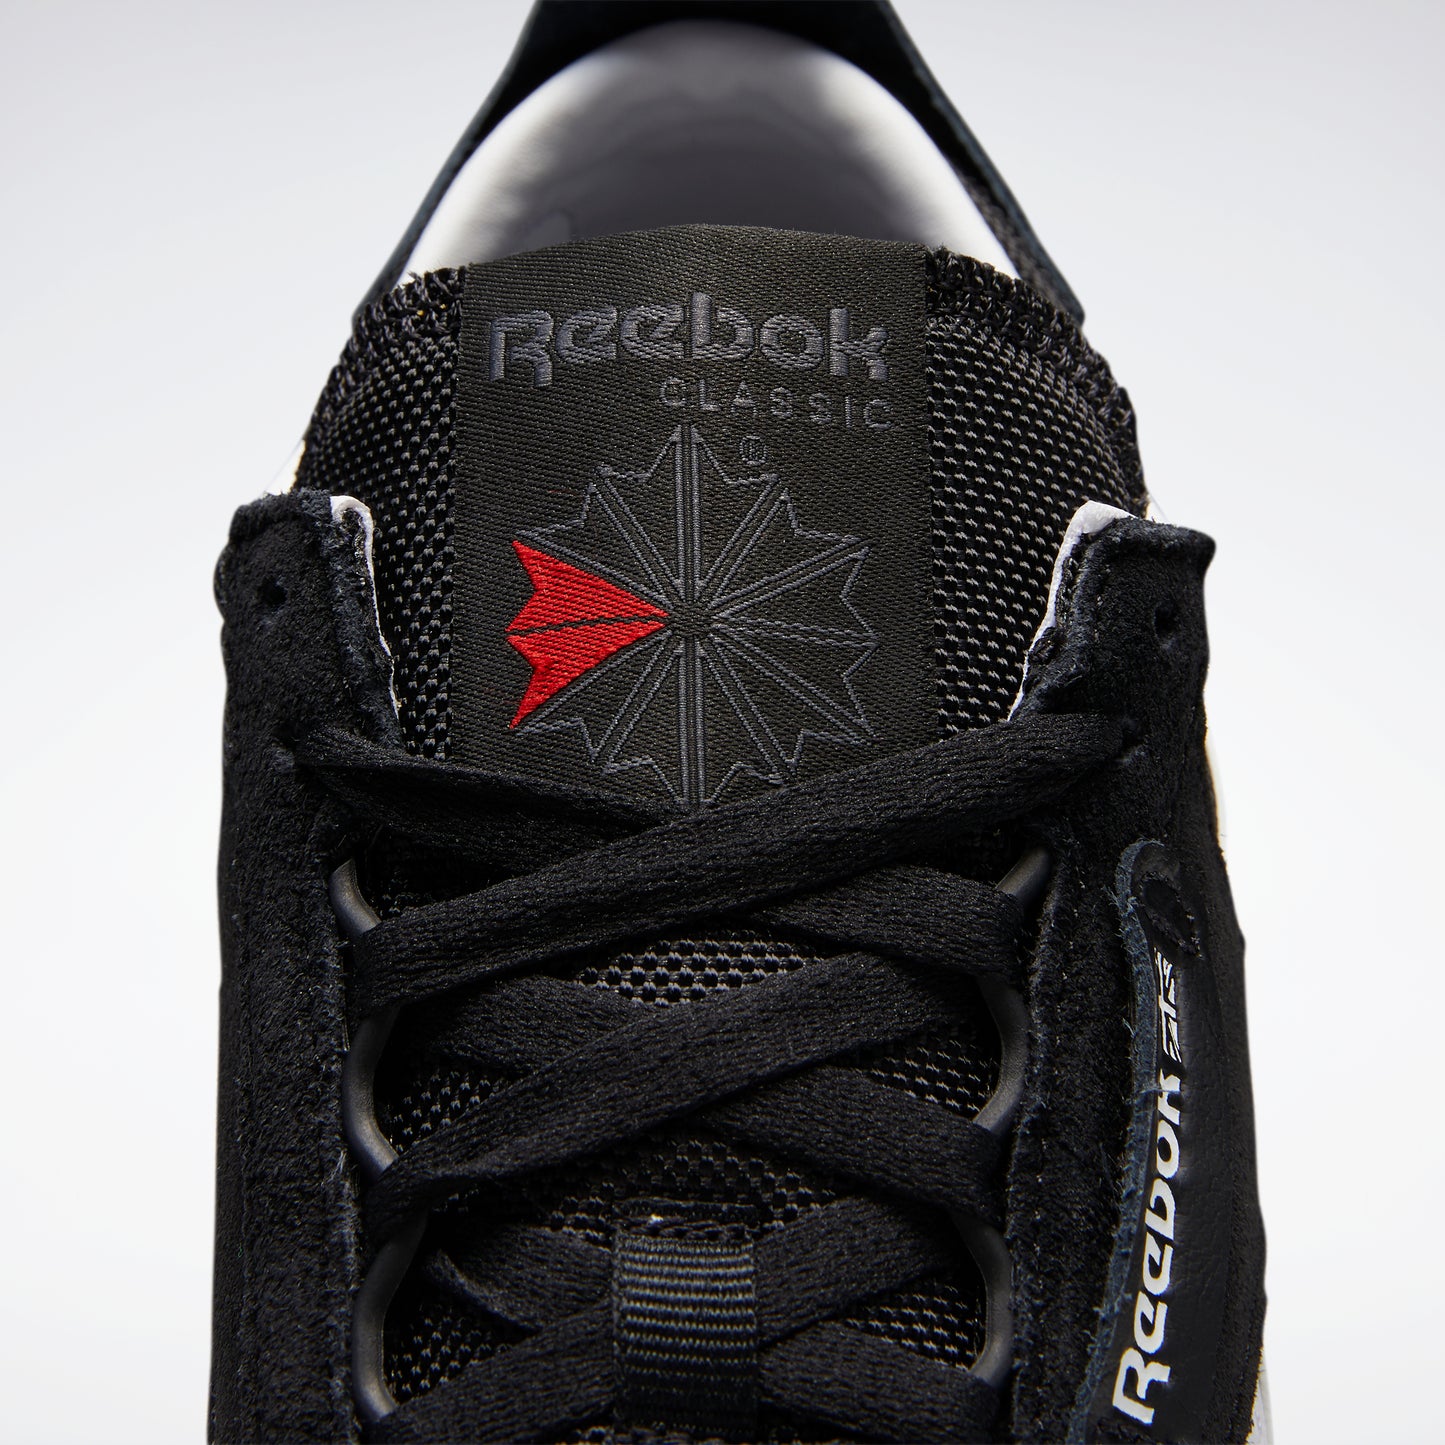 Reebok Footwear Men Classic Leather Legacy Shoes Cblack/Cdgry7/Vecred